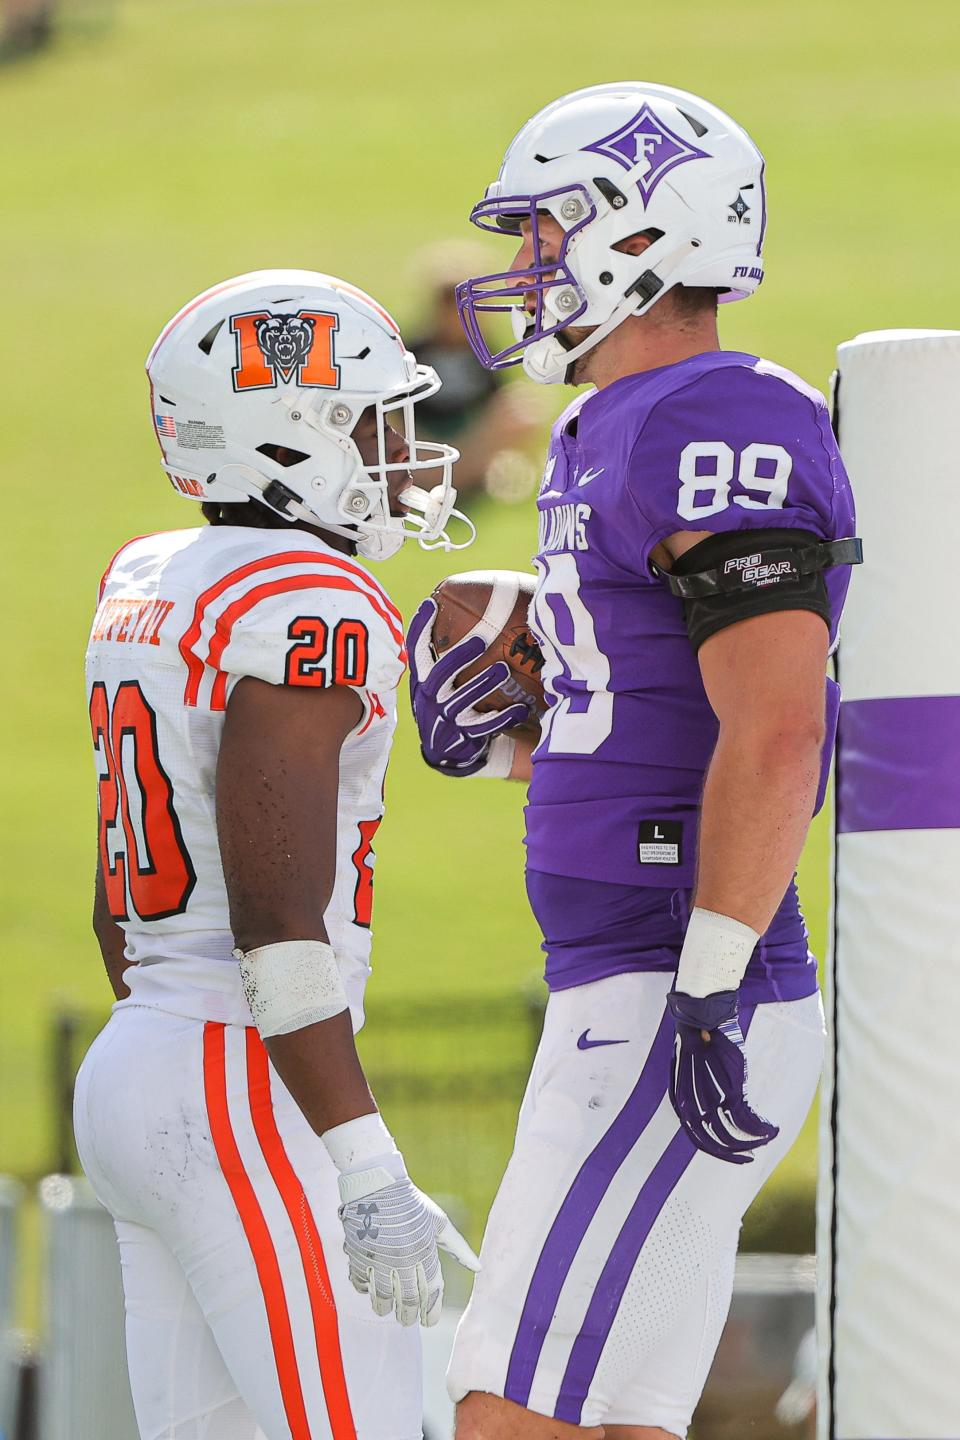 Furman tight end Mason Pline is an NFL draft prospect and had 32 catches for 287 yards for four touchdowns in his lone season with the Paladins.